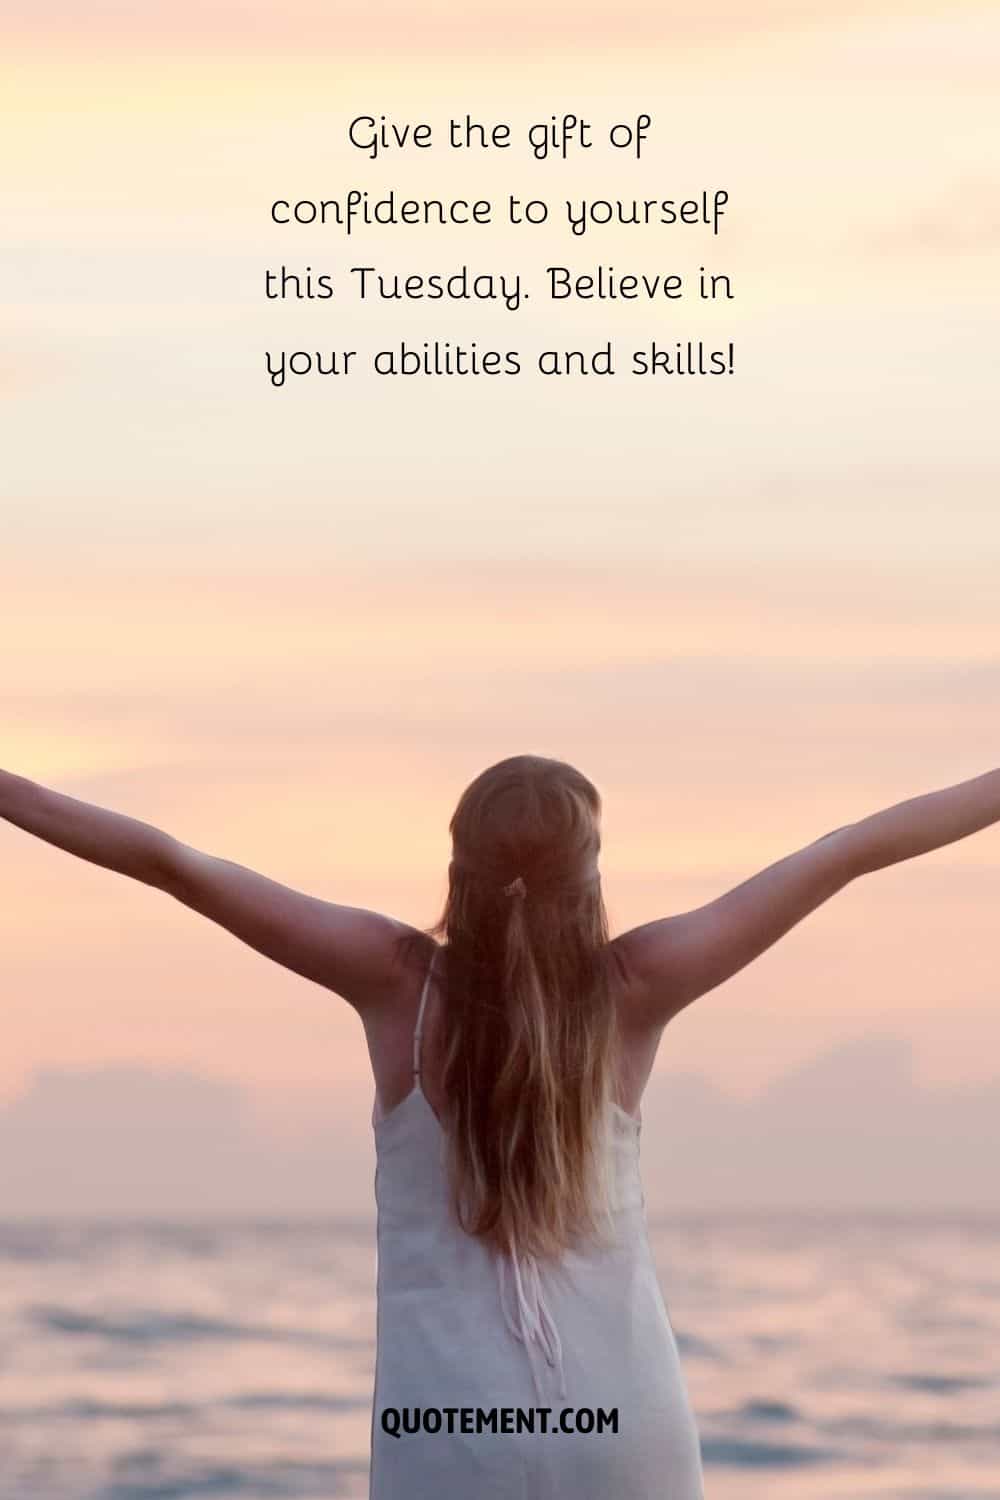 “Give the gift of confidence to yourself this Tuesday. Believe in your abilities and skills!”— Unknown